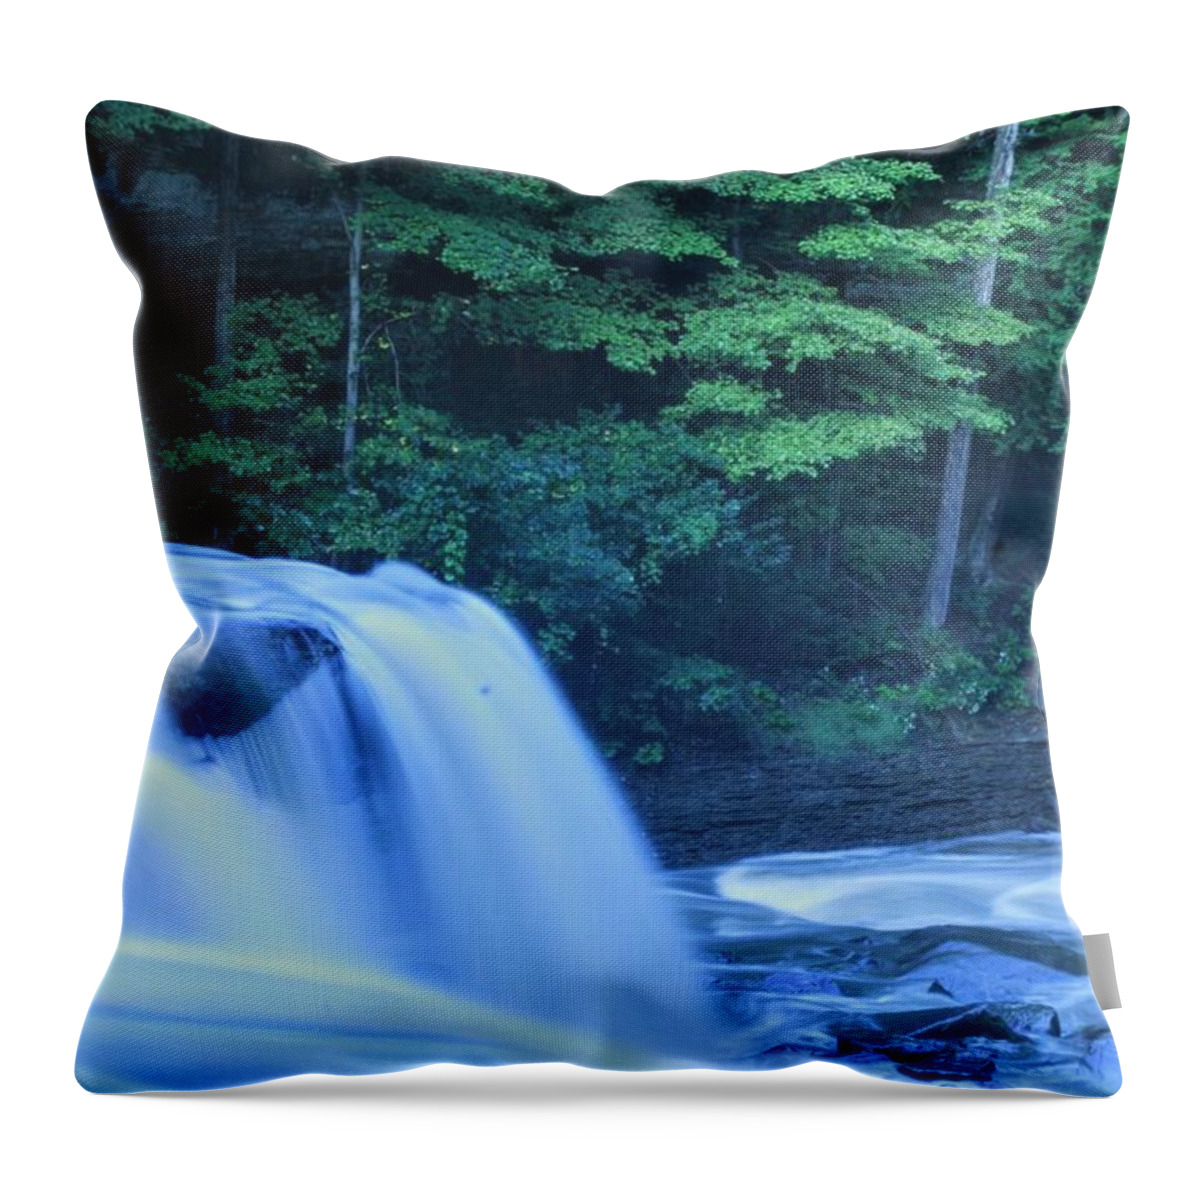  Throw Pillow featuring the photograph Great Falls by Brad Nellis